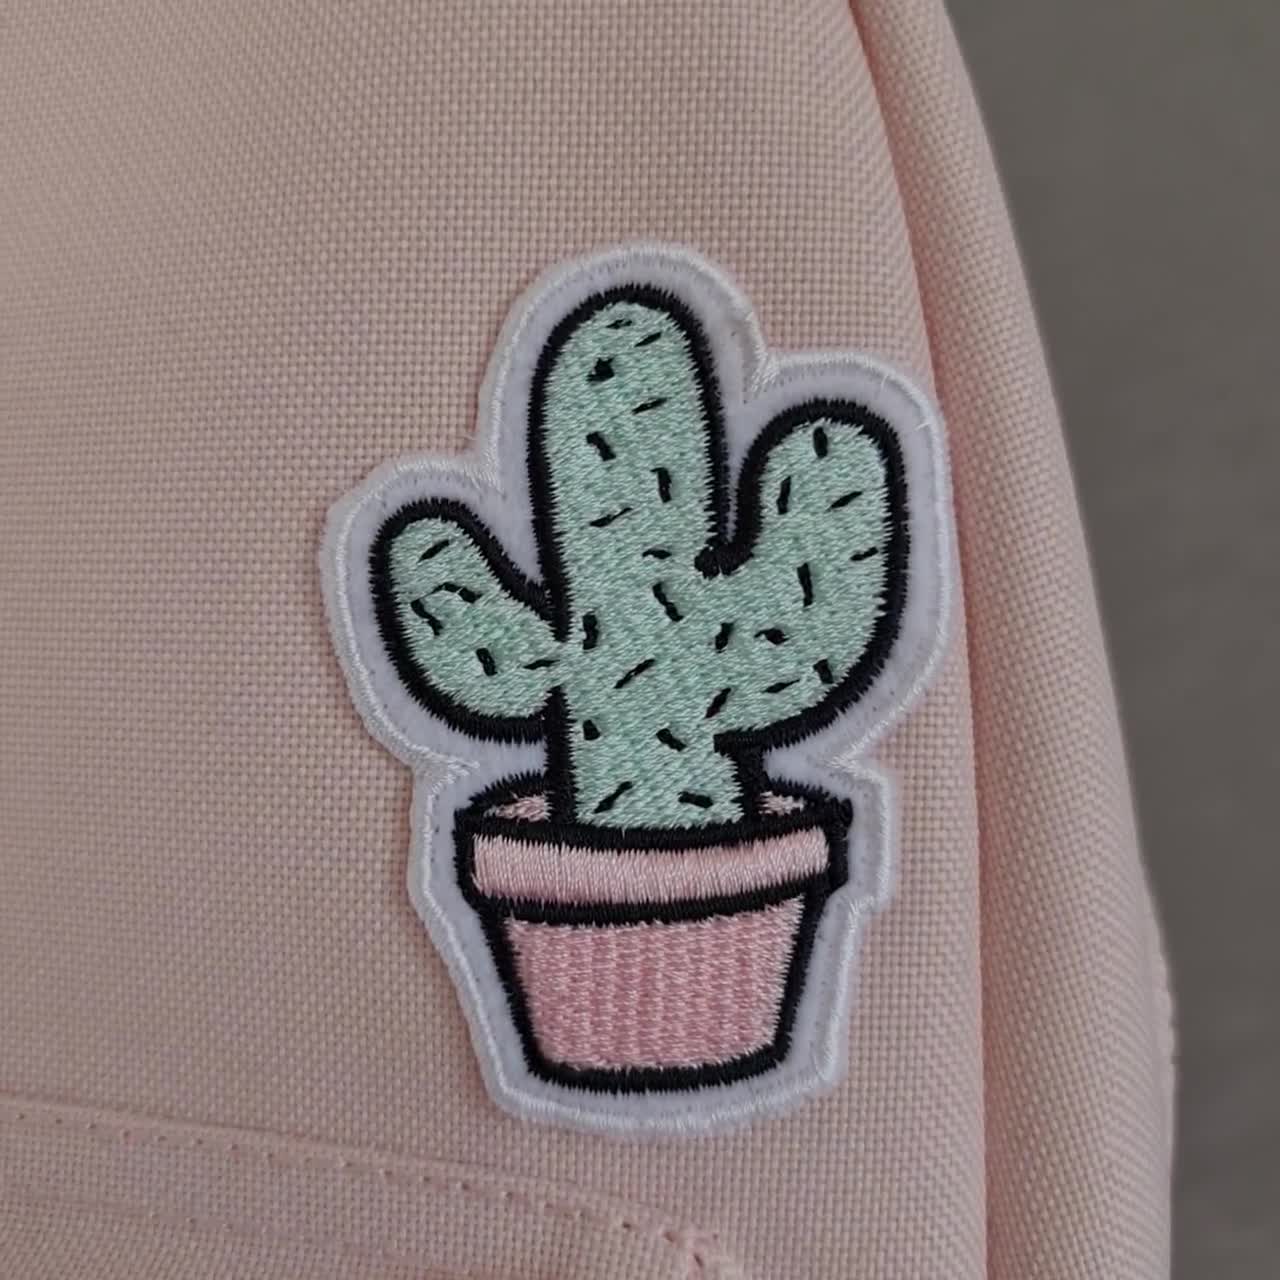 Cute Sewing Notions Cactus Embroidery Patches For Clothing Jackets Shirts  Iron On Cartoon Patch From Jonnaean, $8.05